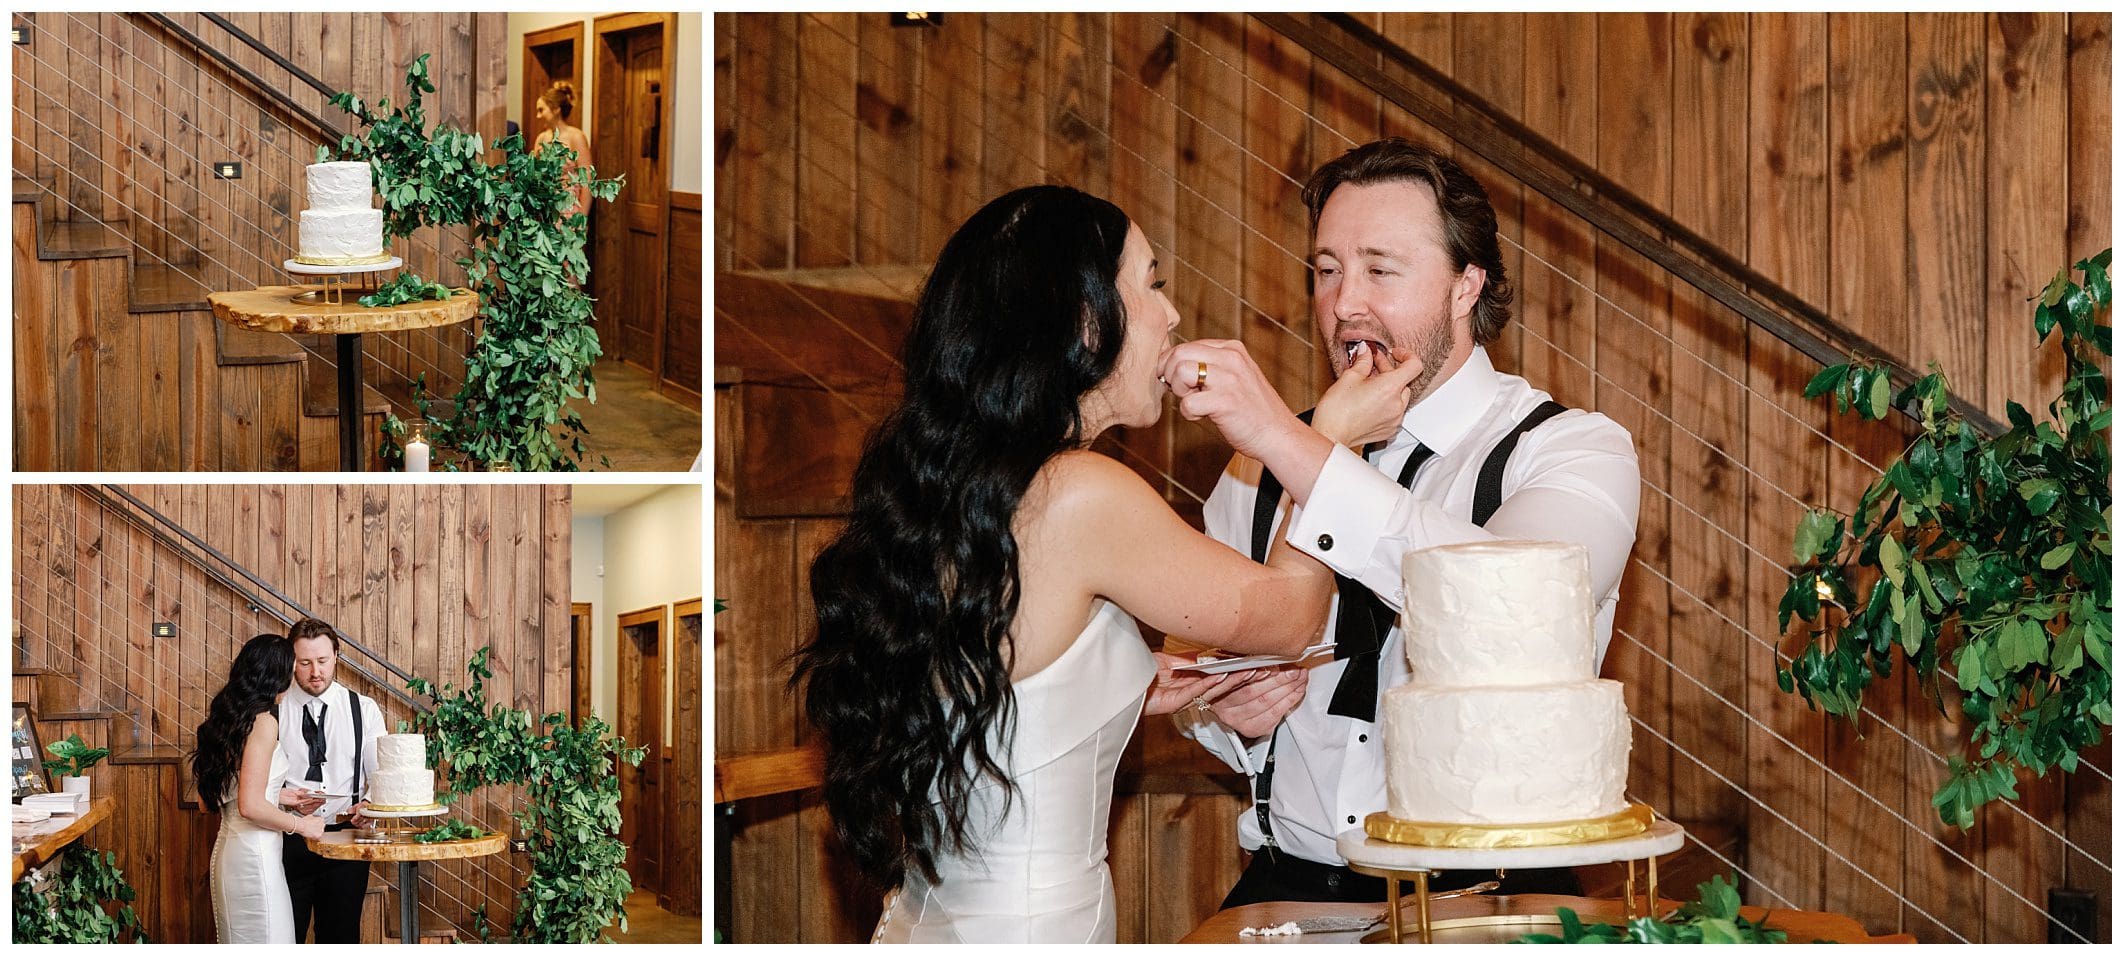 Bride and groom happily feeding each other cake at their wedding reception, surrounded by wooden decor and green plants.